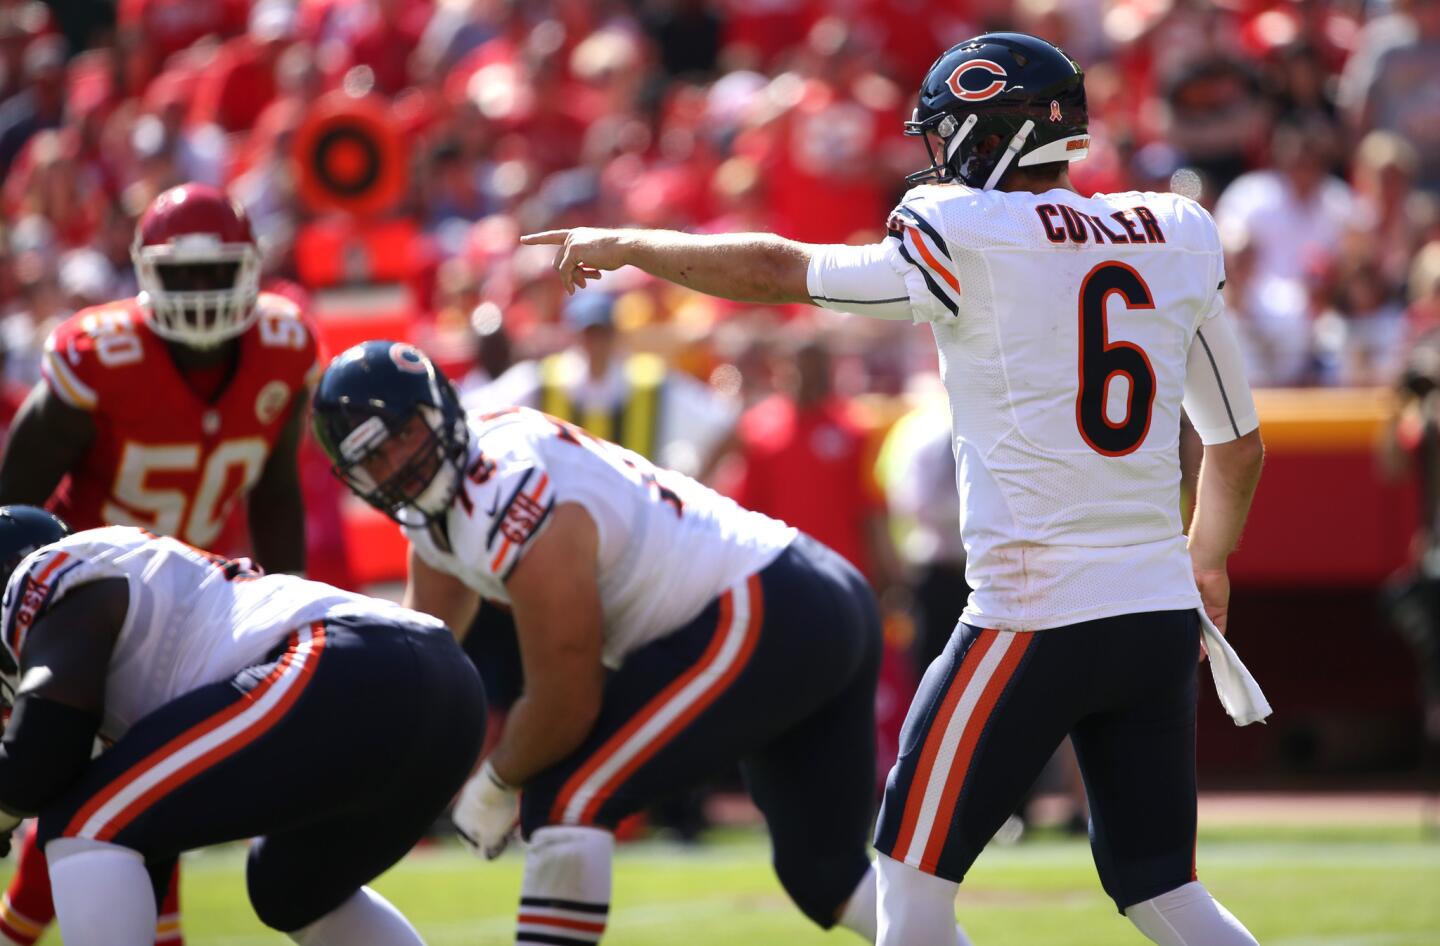 Jay Cutler directs the offense in the second quarter of a game against the Chiefs.